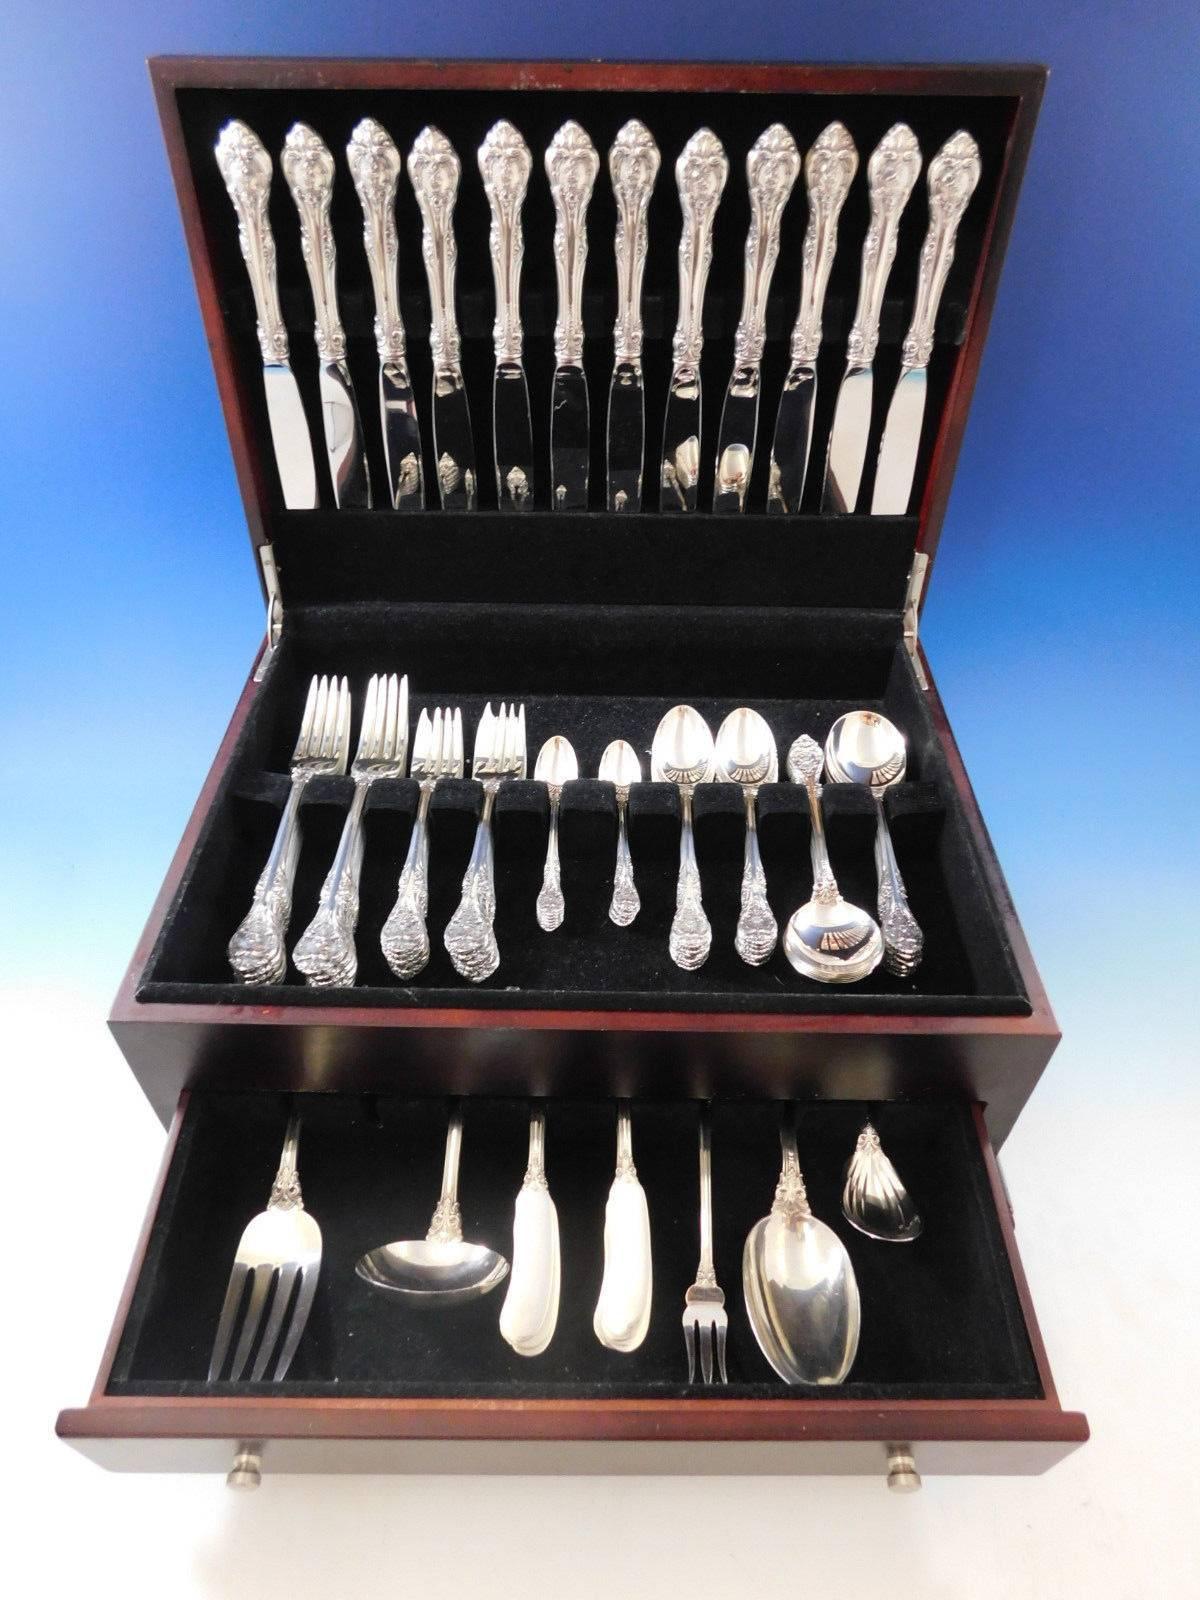 Outstanding Dinner size King Edward by Gorham Sterling silver Flatware set, 89 pieces. This set includes:

12 dinner size knives, 9 5/8